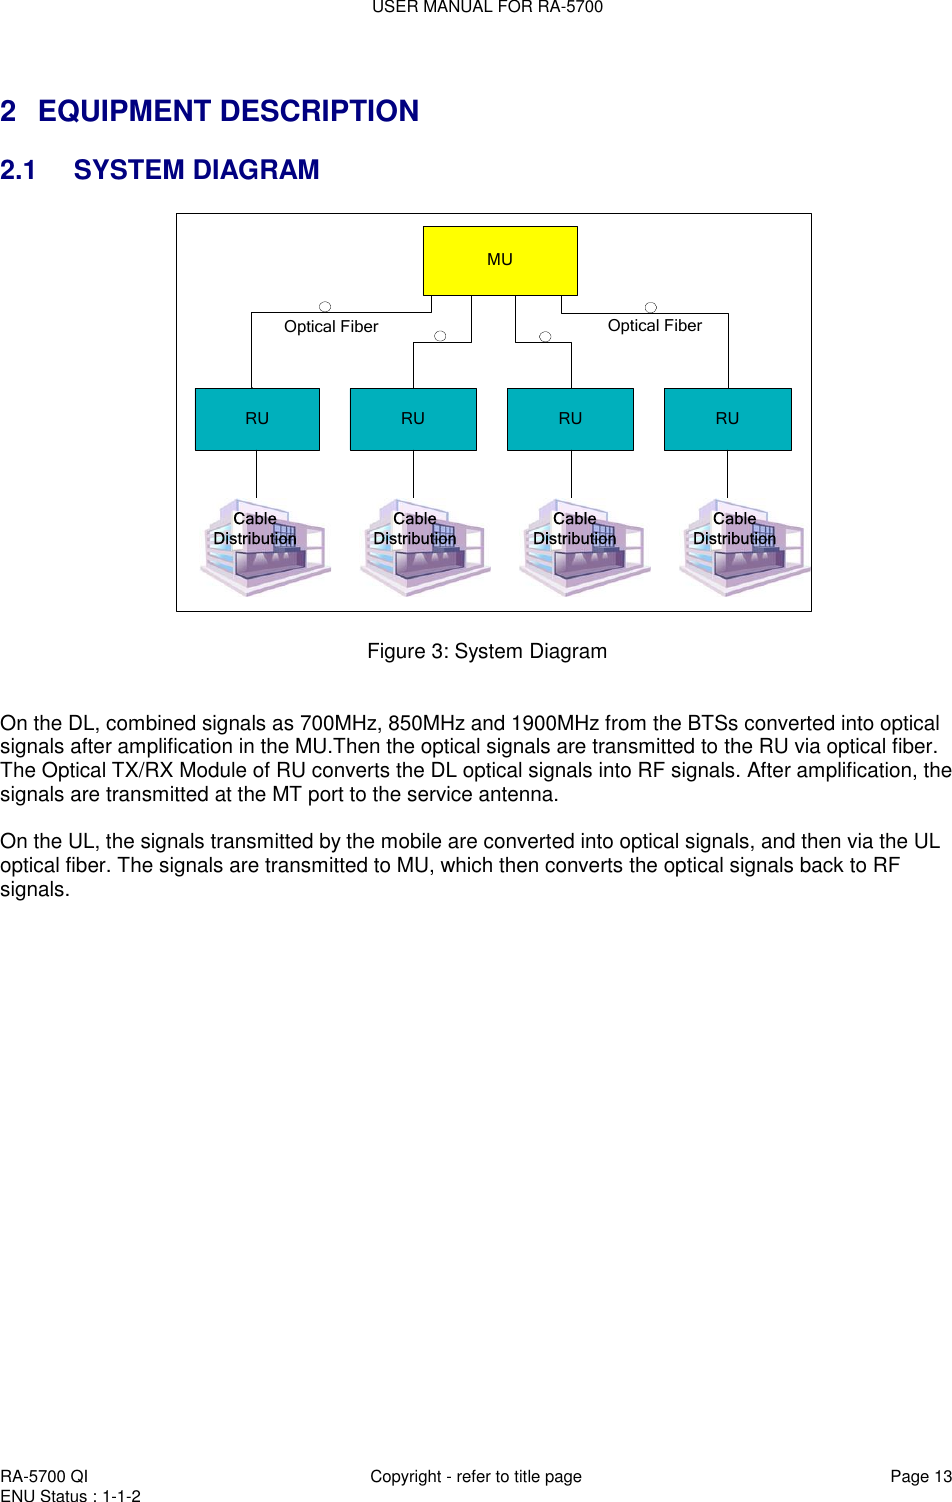 USER MANUAL FOR RA-5700  RA-5700 QI  Copyright - refer to title page Page 13 ENU Status : 1-1-2     2  EQUIPMENT DESCRIPTION 2.1  SYSTEM DIAGRAM RUOptical FiberMURU RU RUOptical FiberCableDistributionCableDistributionCableDistributionCableDistribution  Figure 3: System Diagram   On the DL, combined signals as 700MHz, 850MHz and 1900MHz from the BTSs converted into optical signals after amplification in the MU.Then the optical signals are transmitted to the RU via optical fiber. The Optical TX/RX Module of RU converts the DL optical signals into RF signals. After amplification, the signals are transmitted at the MT port to the service antenna.   On the UL, the signals transmitted by the mobile are converted into optical signals, and then via the UL optical fiber. The signals are transmitted to MU, which then converts the optical signals back to RF signals.   